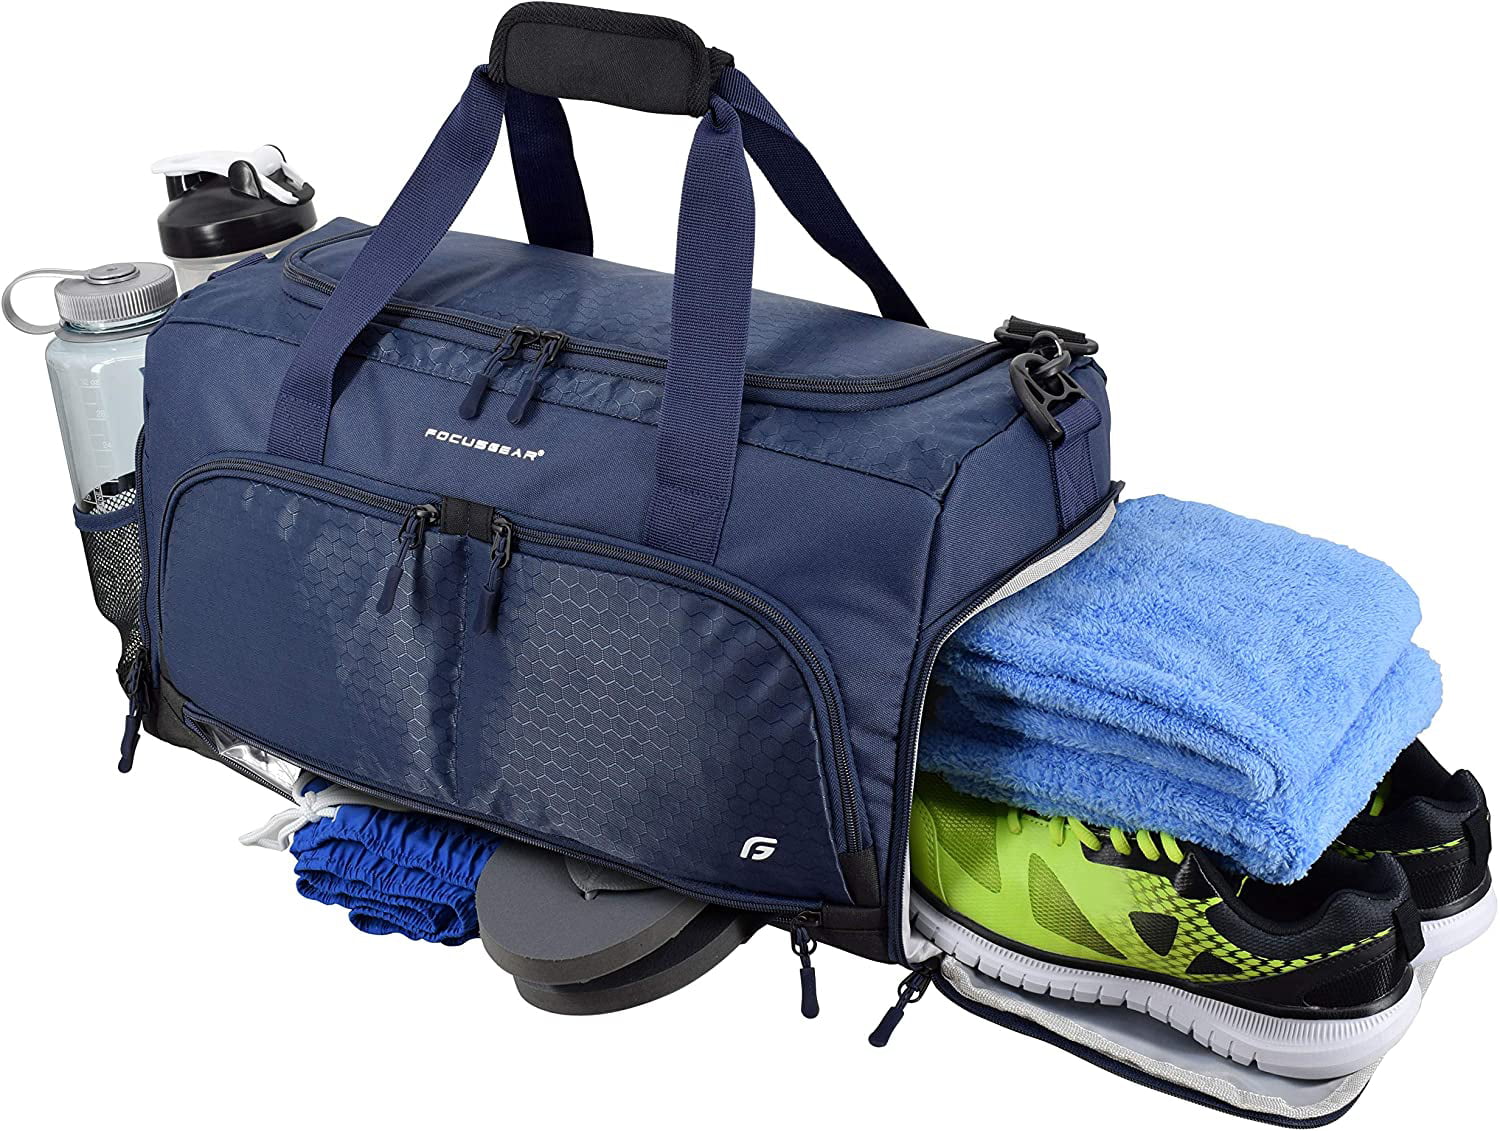 Teal, Small 15 Ultimate Gym Bag 2.0: The Durable Crowdsource Designed Duffel Bag with 10 Optimal Compartments Including Water Resistant Pouch 